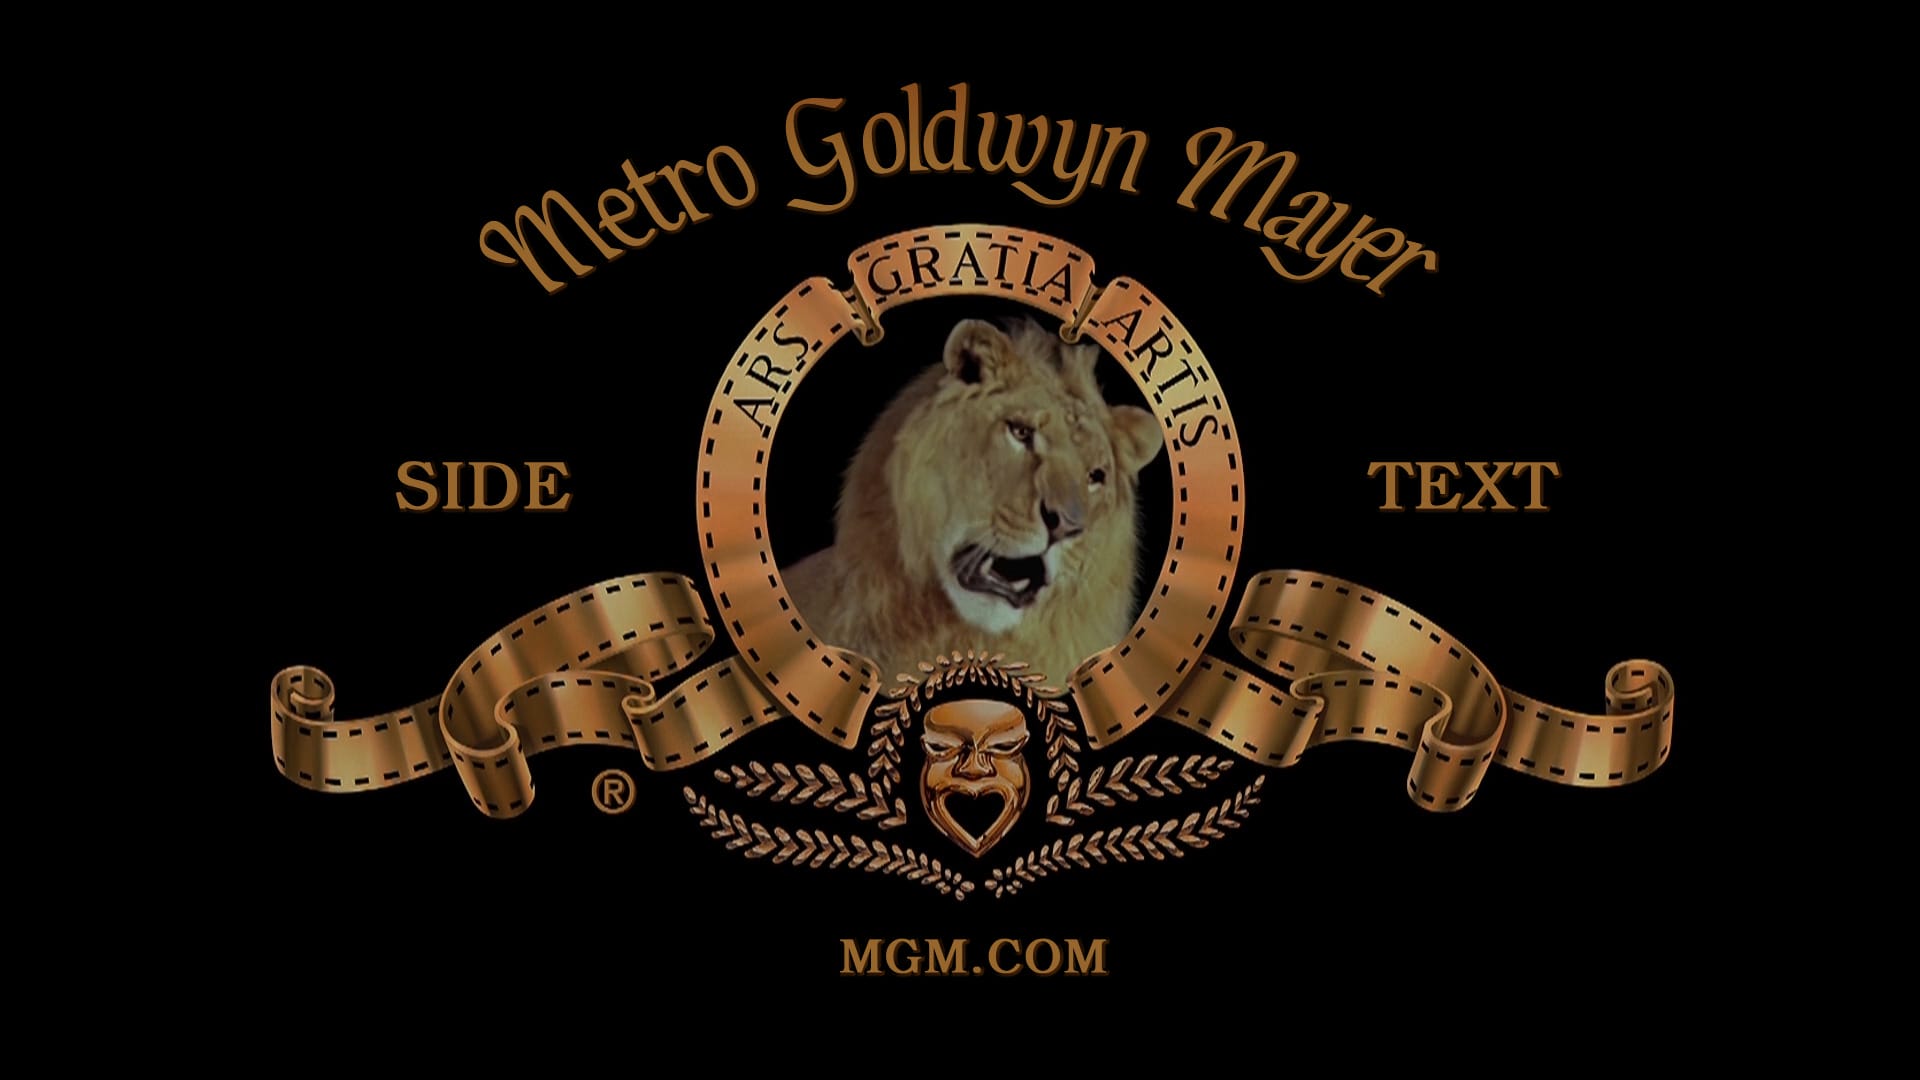 MGM After Effects Template